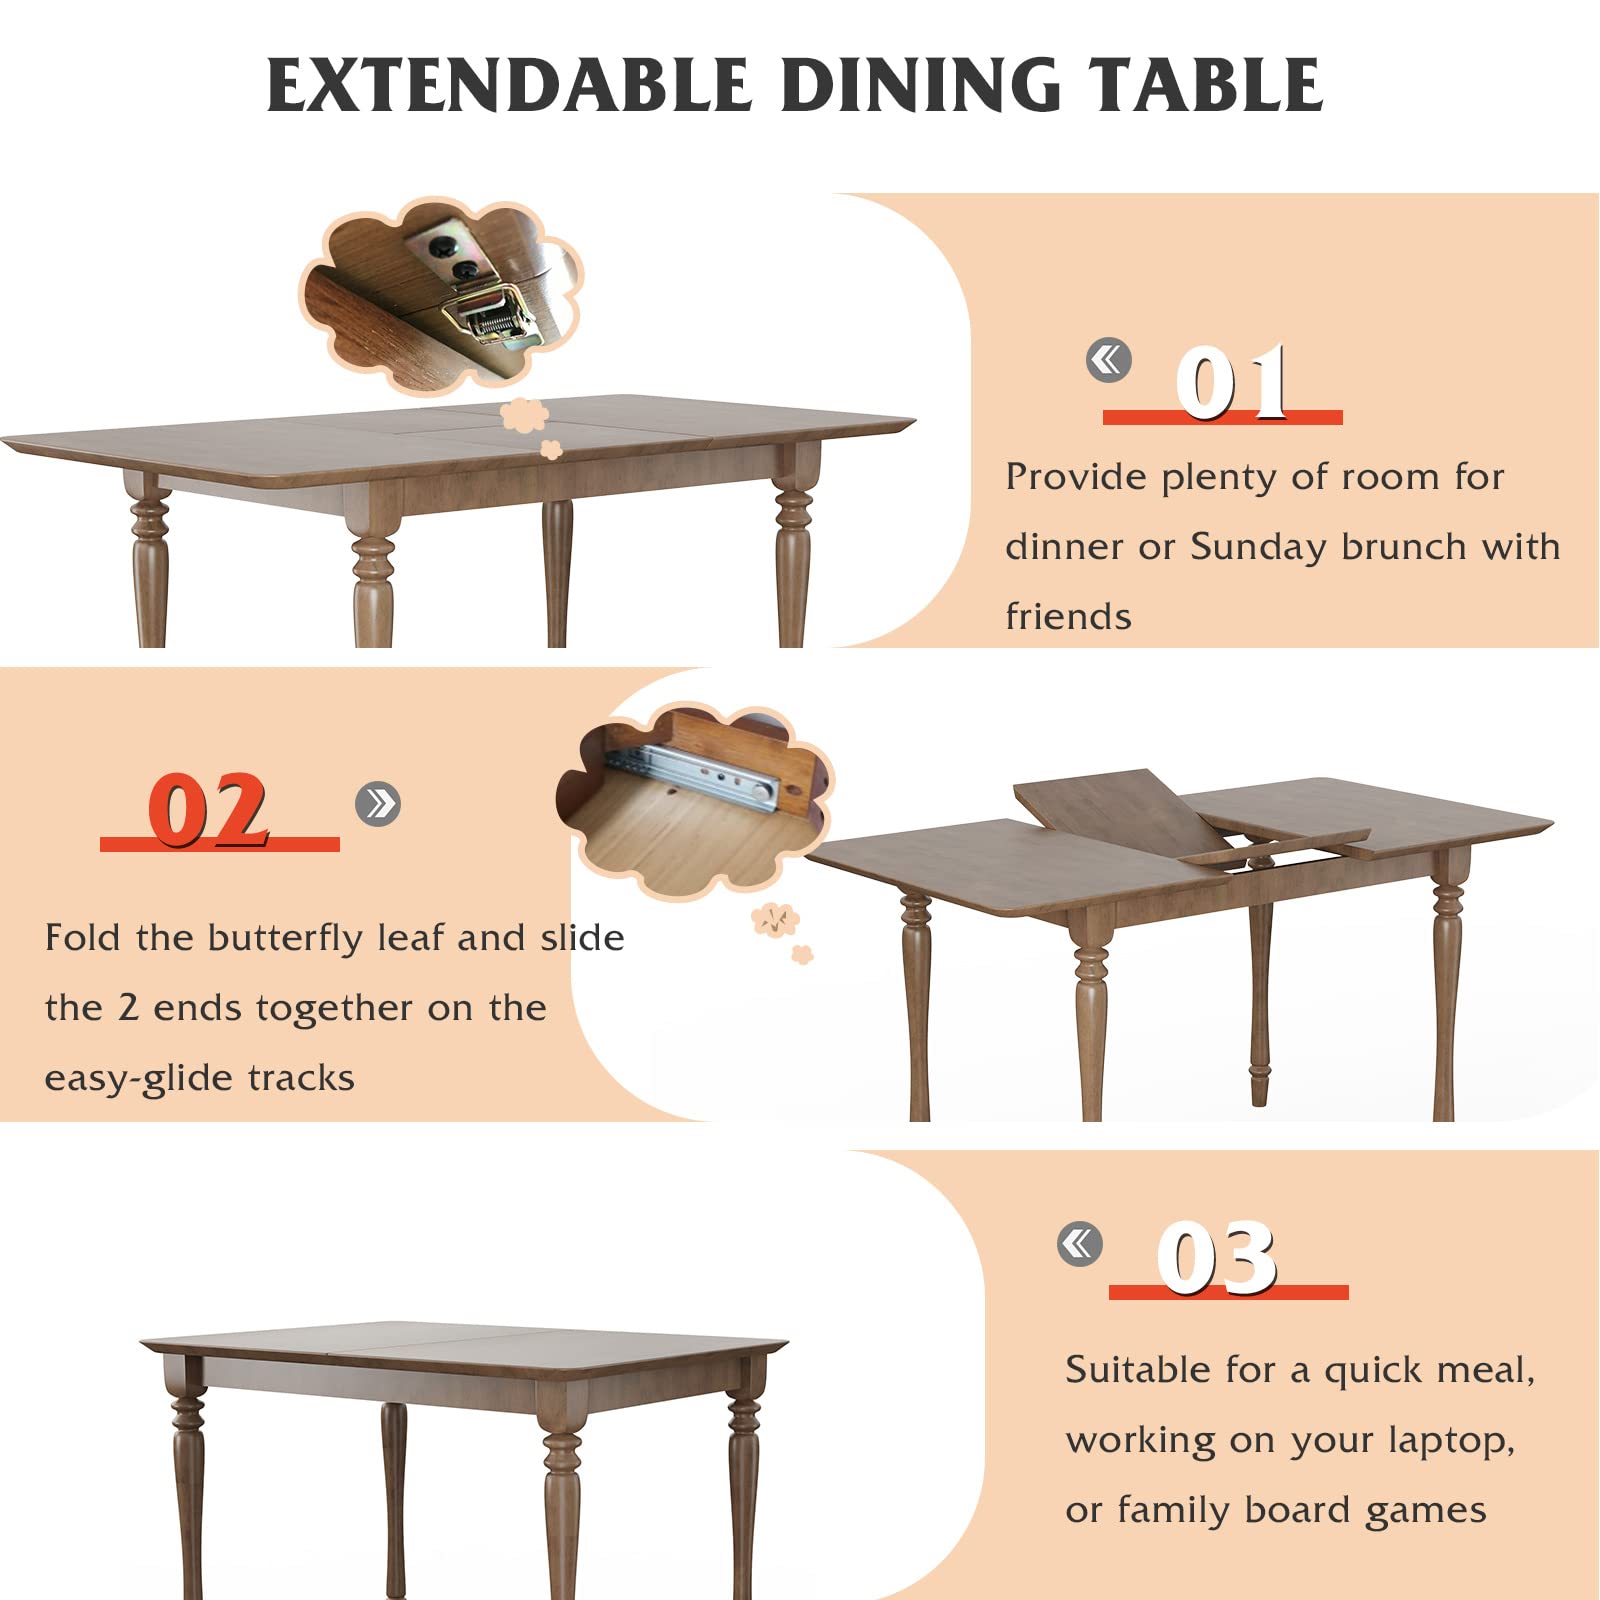 Giantex Farmhouse Dining Table, Extendable Butterfly Leaf Dinette Table